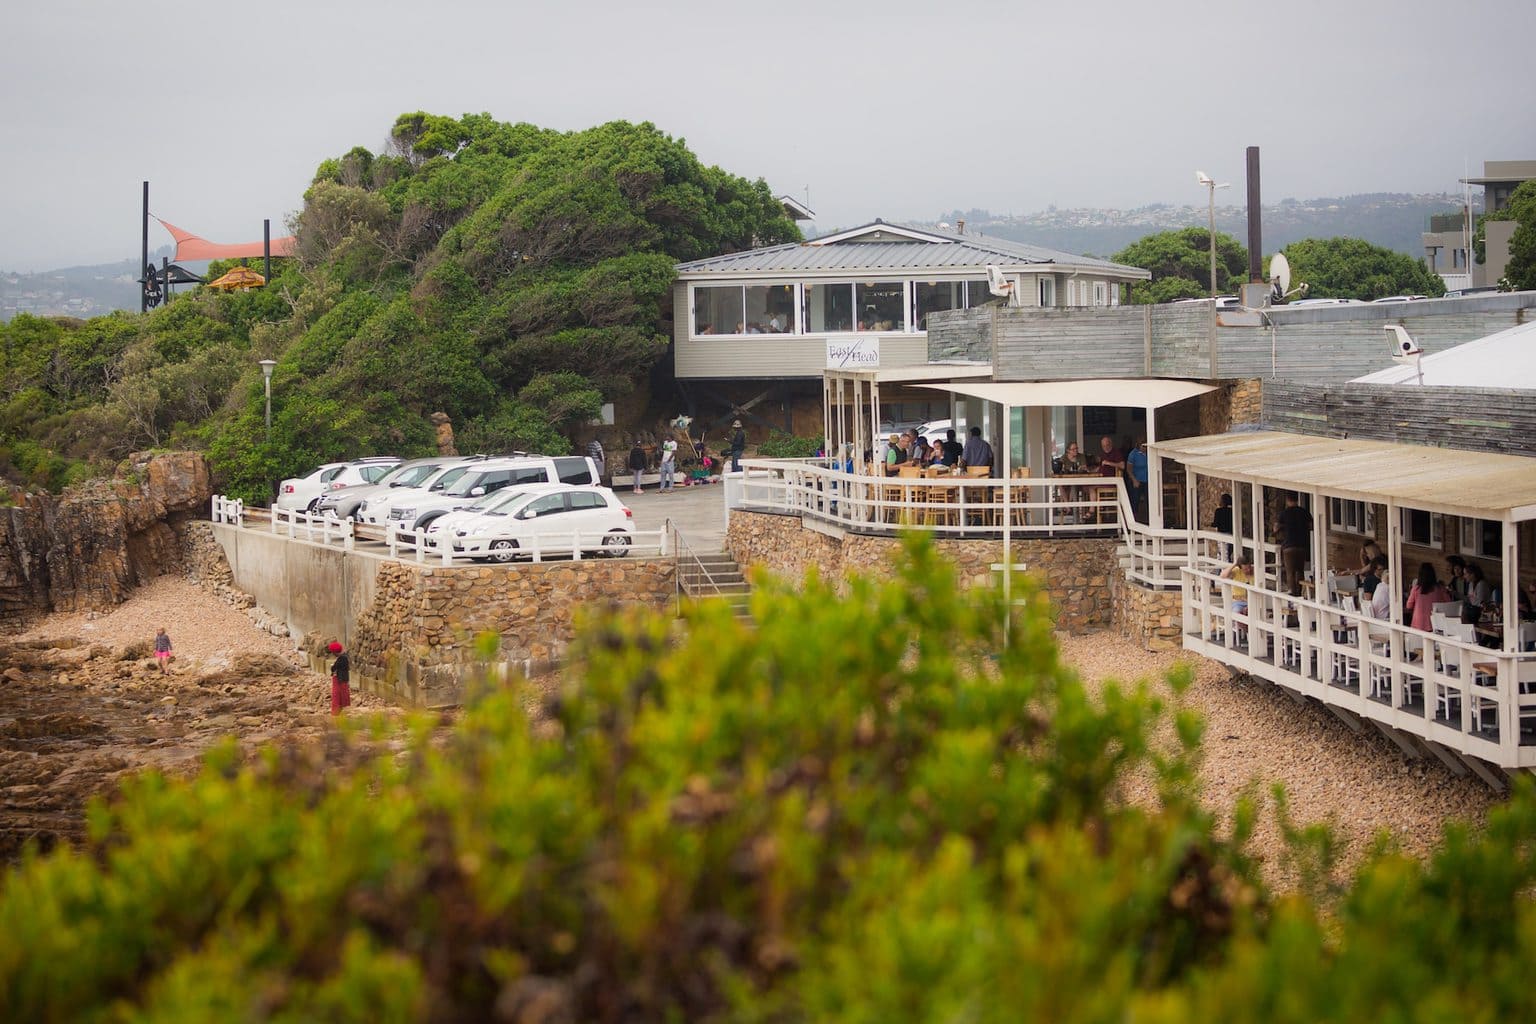 East Head Cafe and parking lot in Knysna